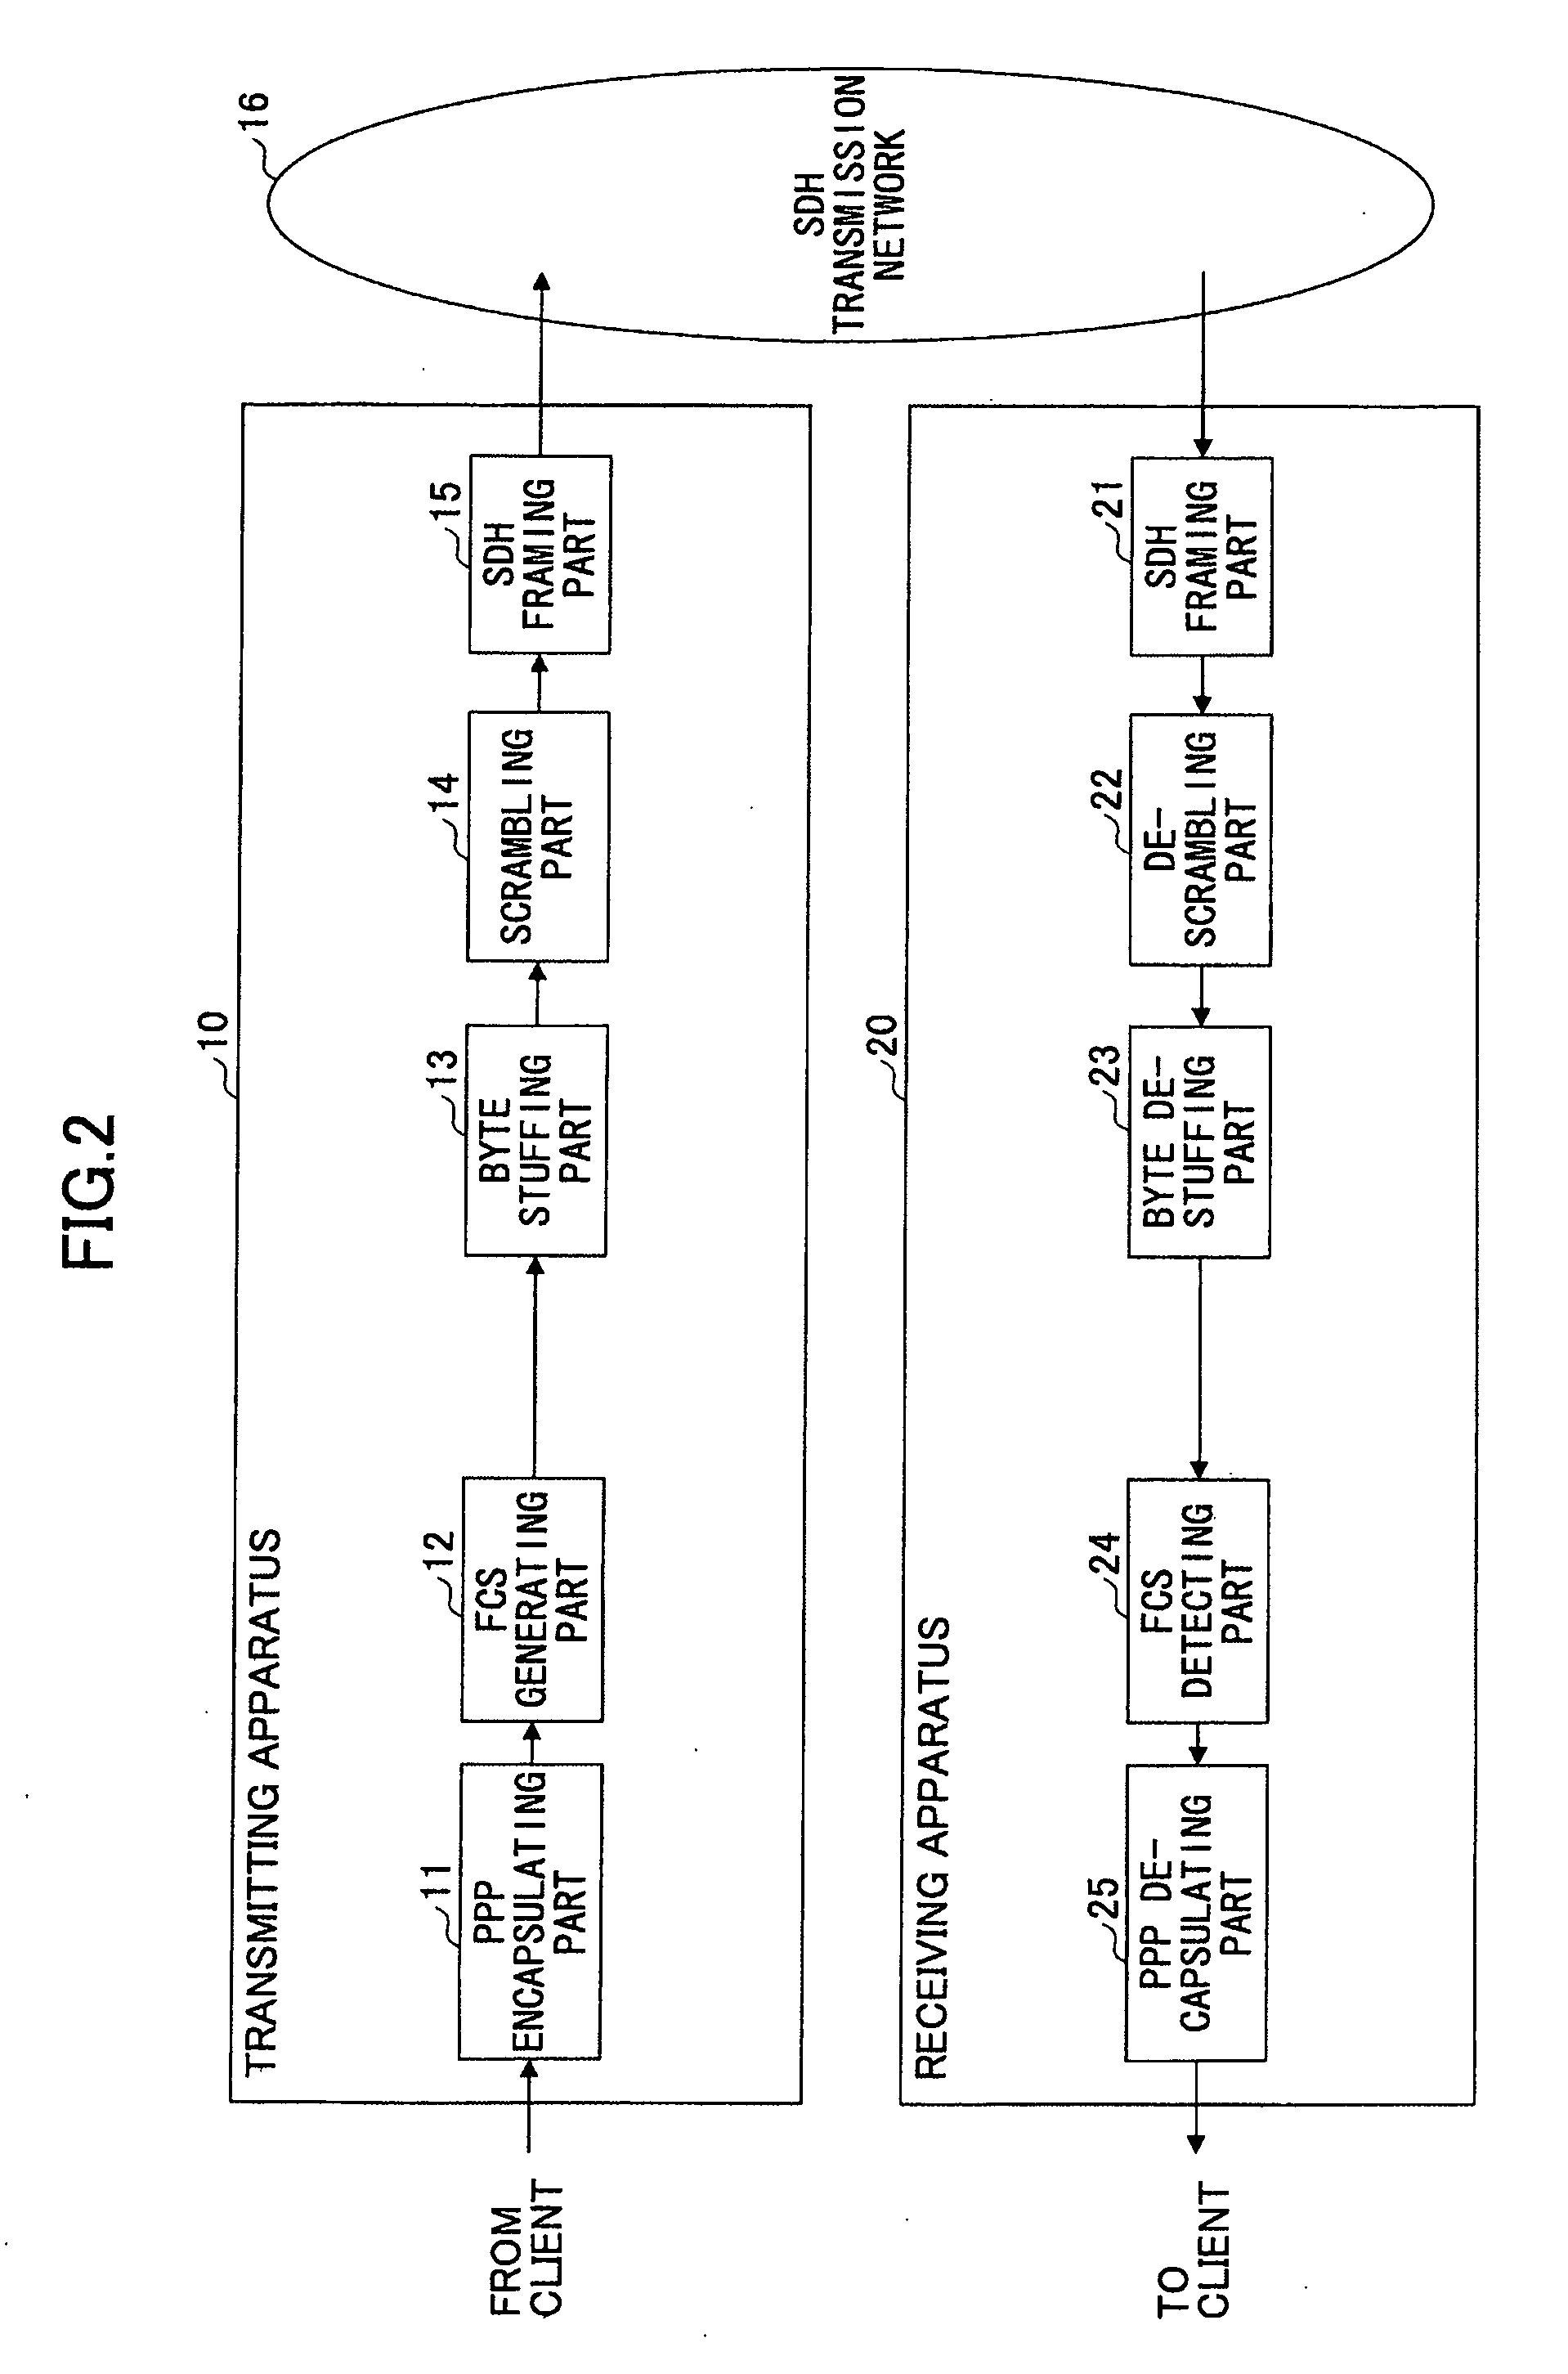 Method and apparatus for transmitting data from asynchronous network via synchronous network